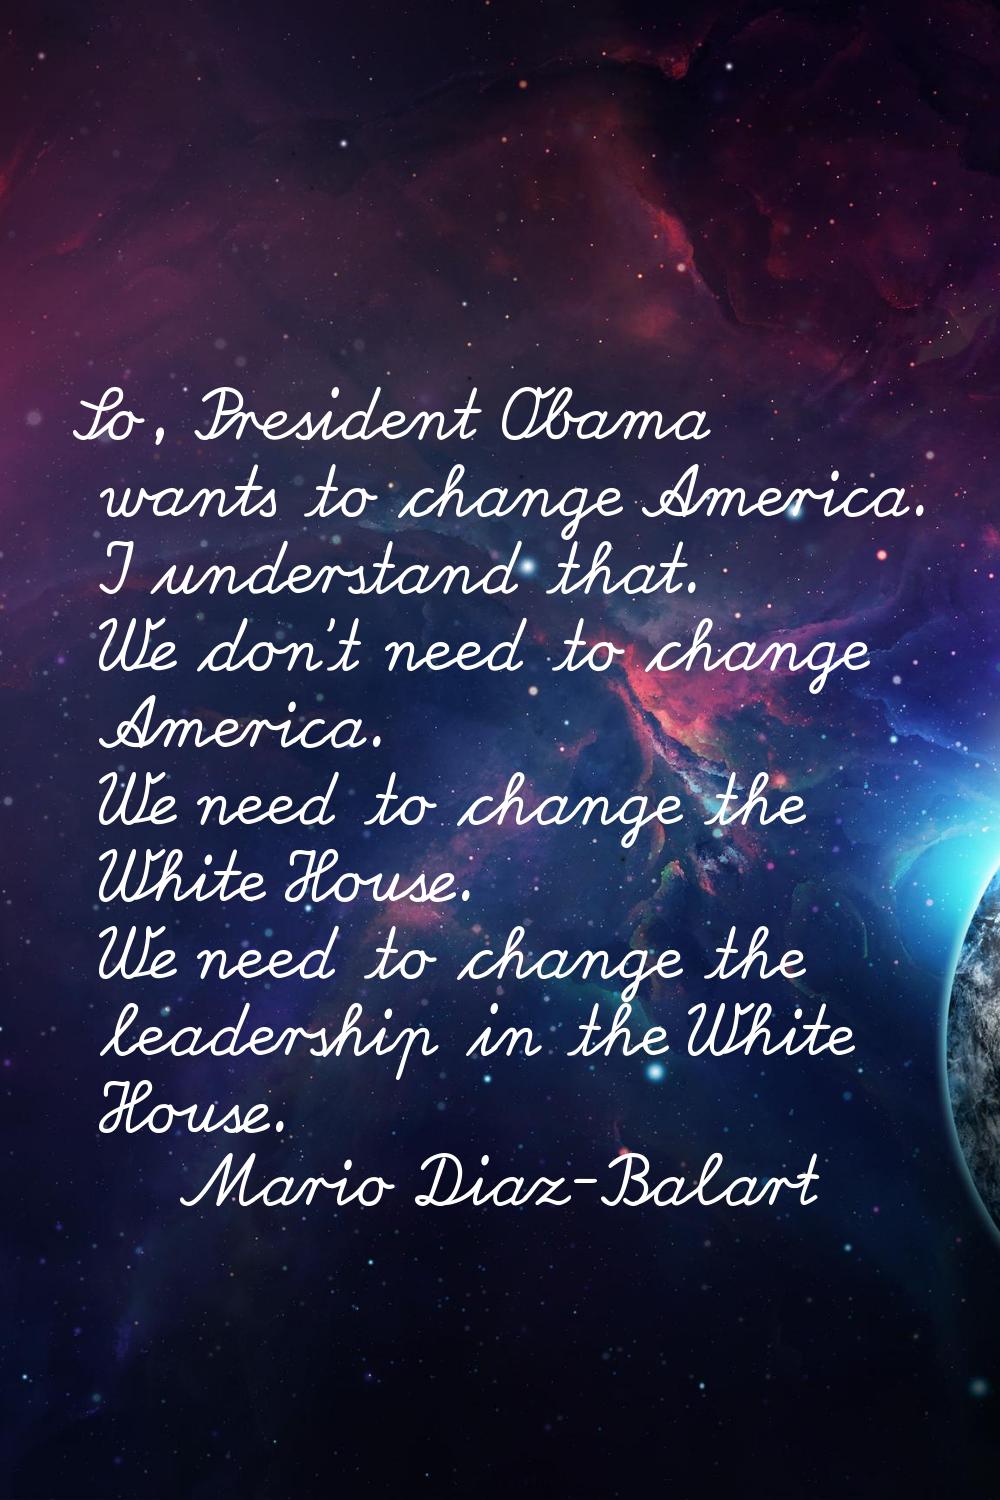 So, President Obama wants to change America. I understand that. We don't need to change America. We